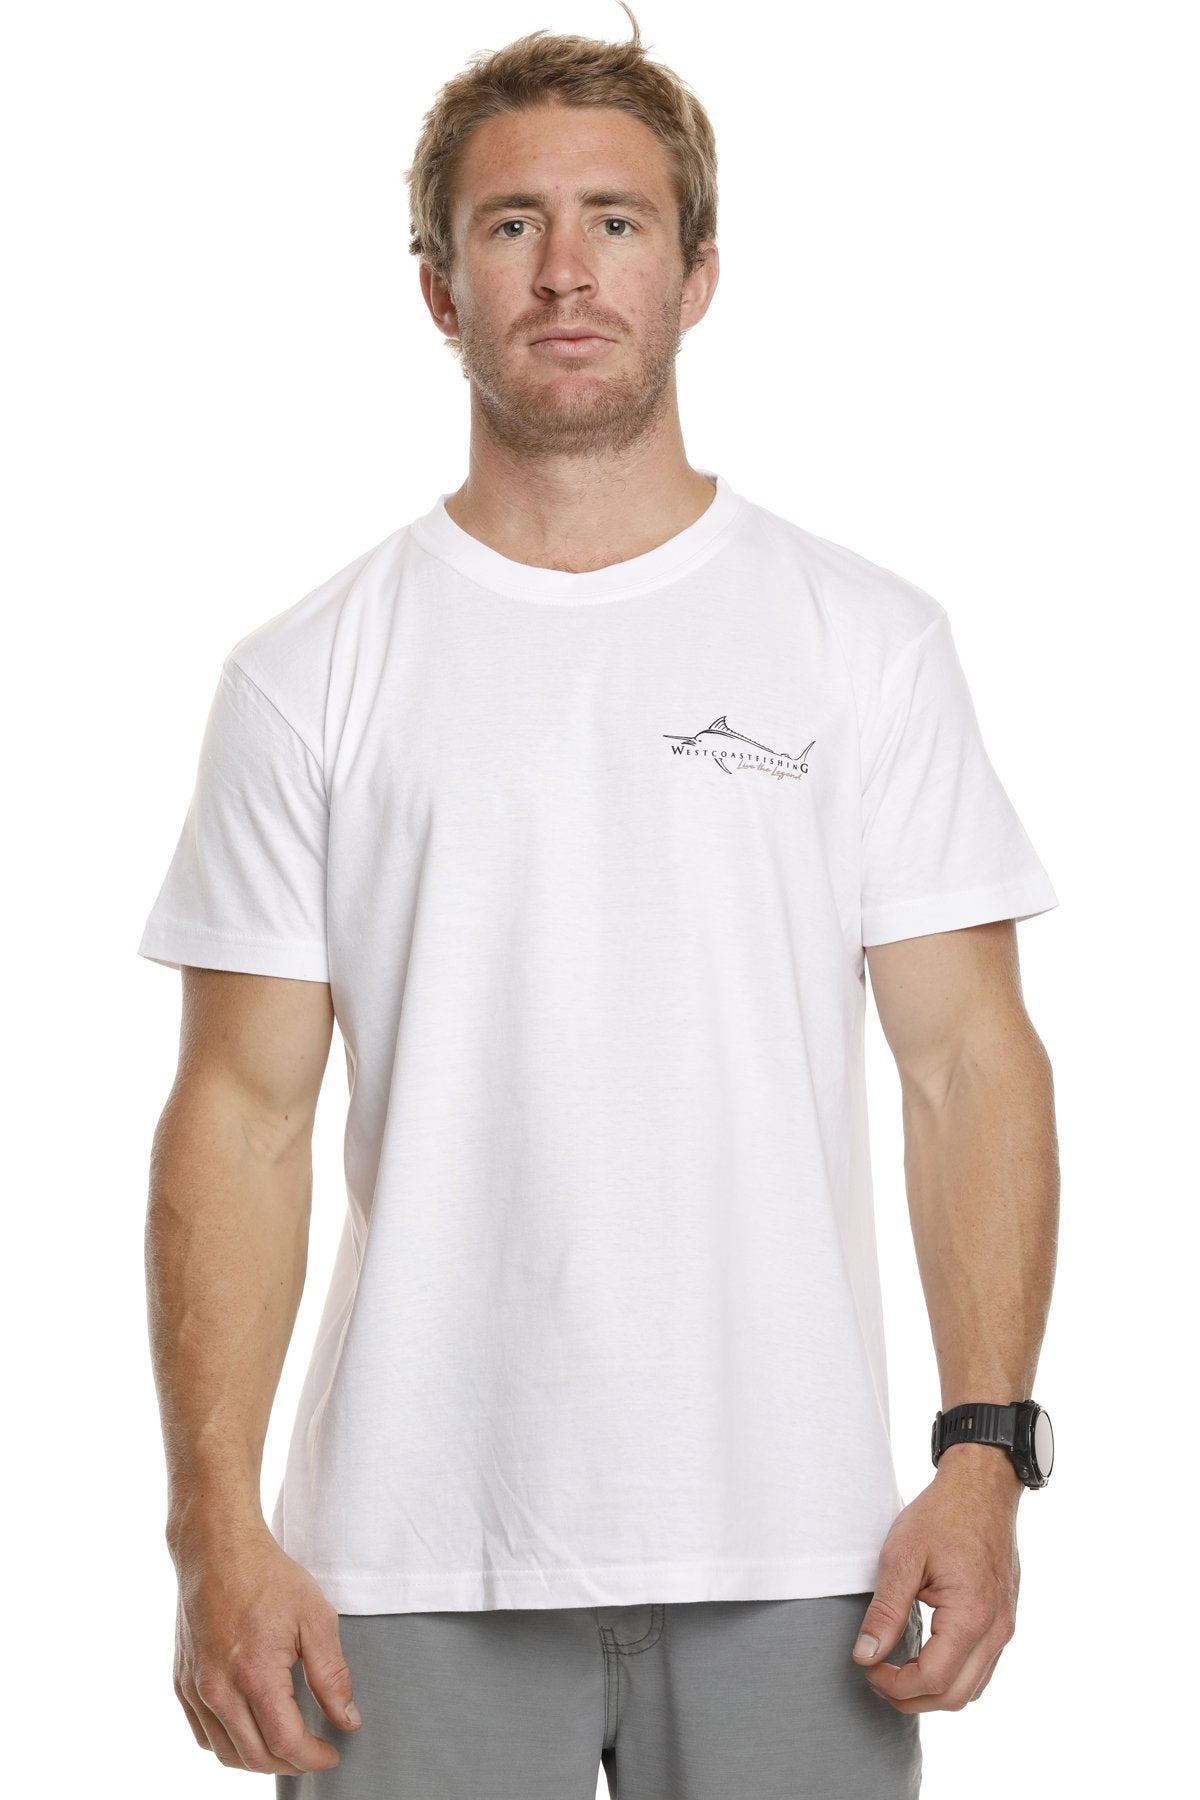 West Coast Fishing Co Sports Fisher Tee White Front